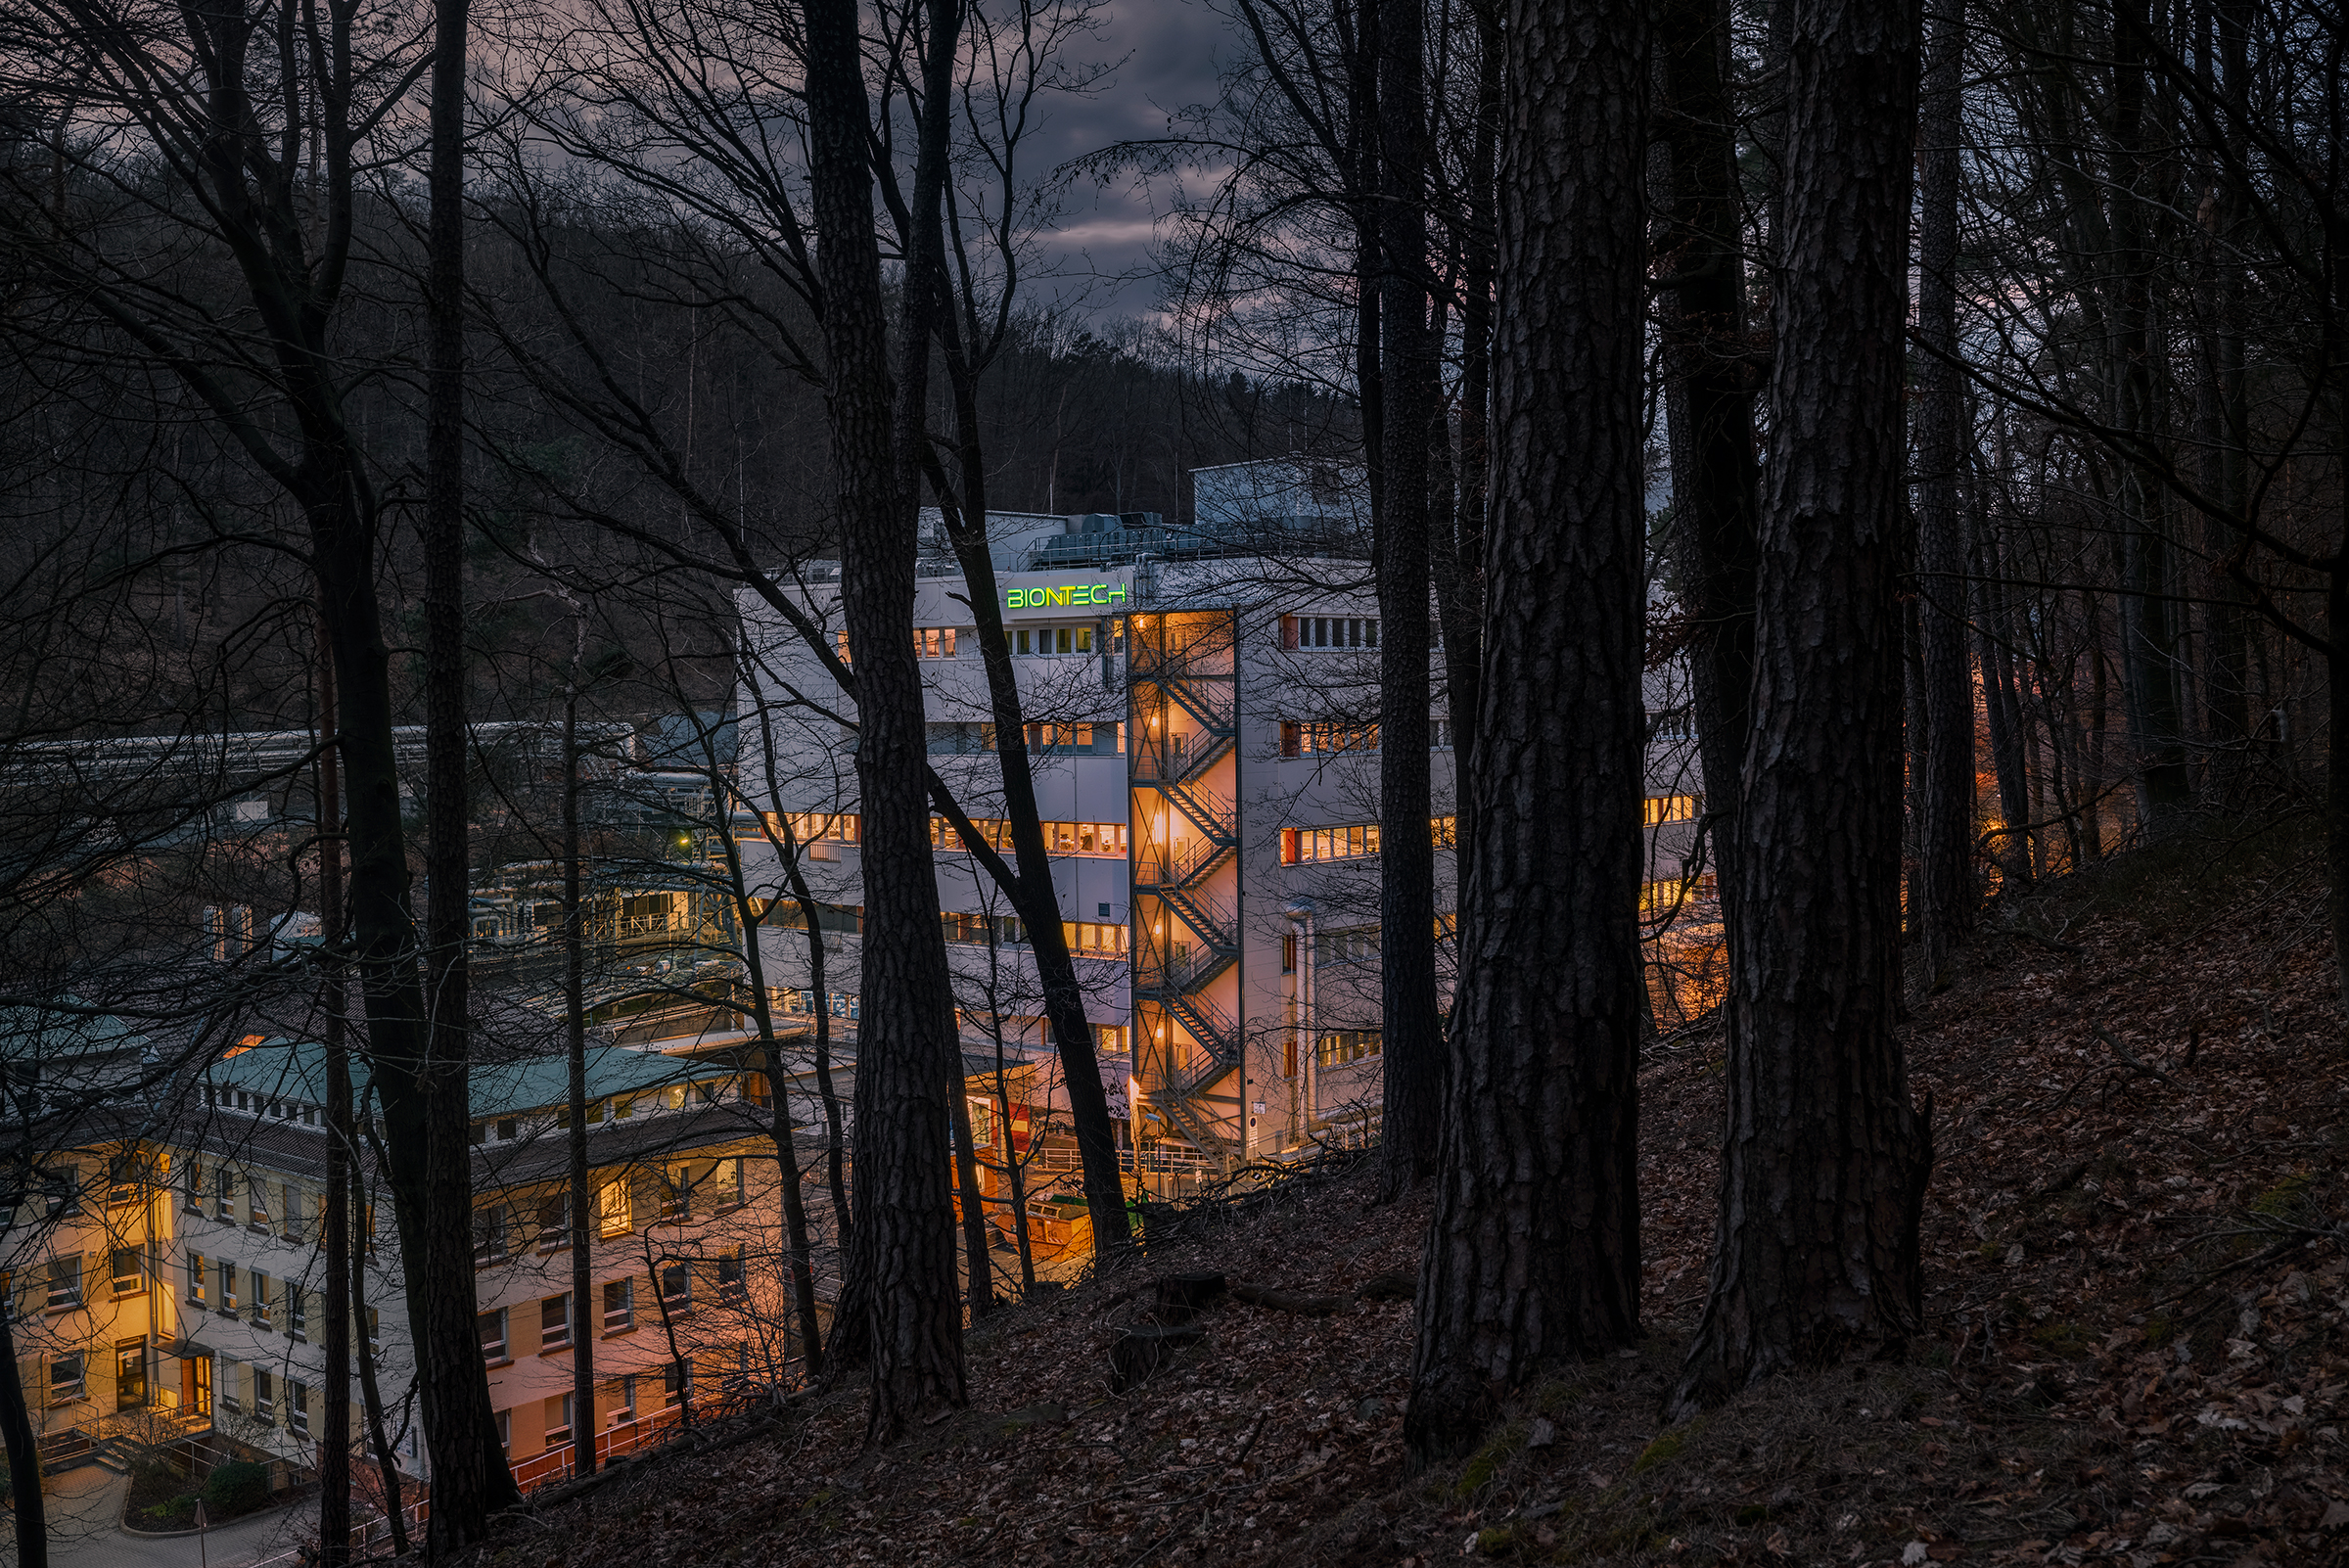 Operations at the Marburg production site never stop, not even at night. (Luca Locatelli for TIME)